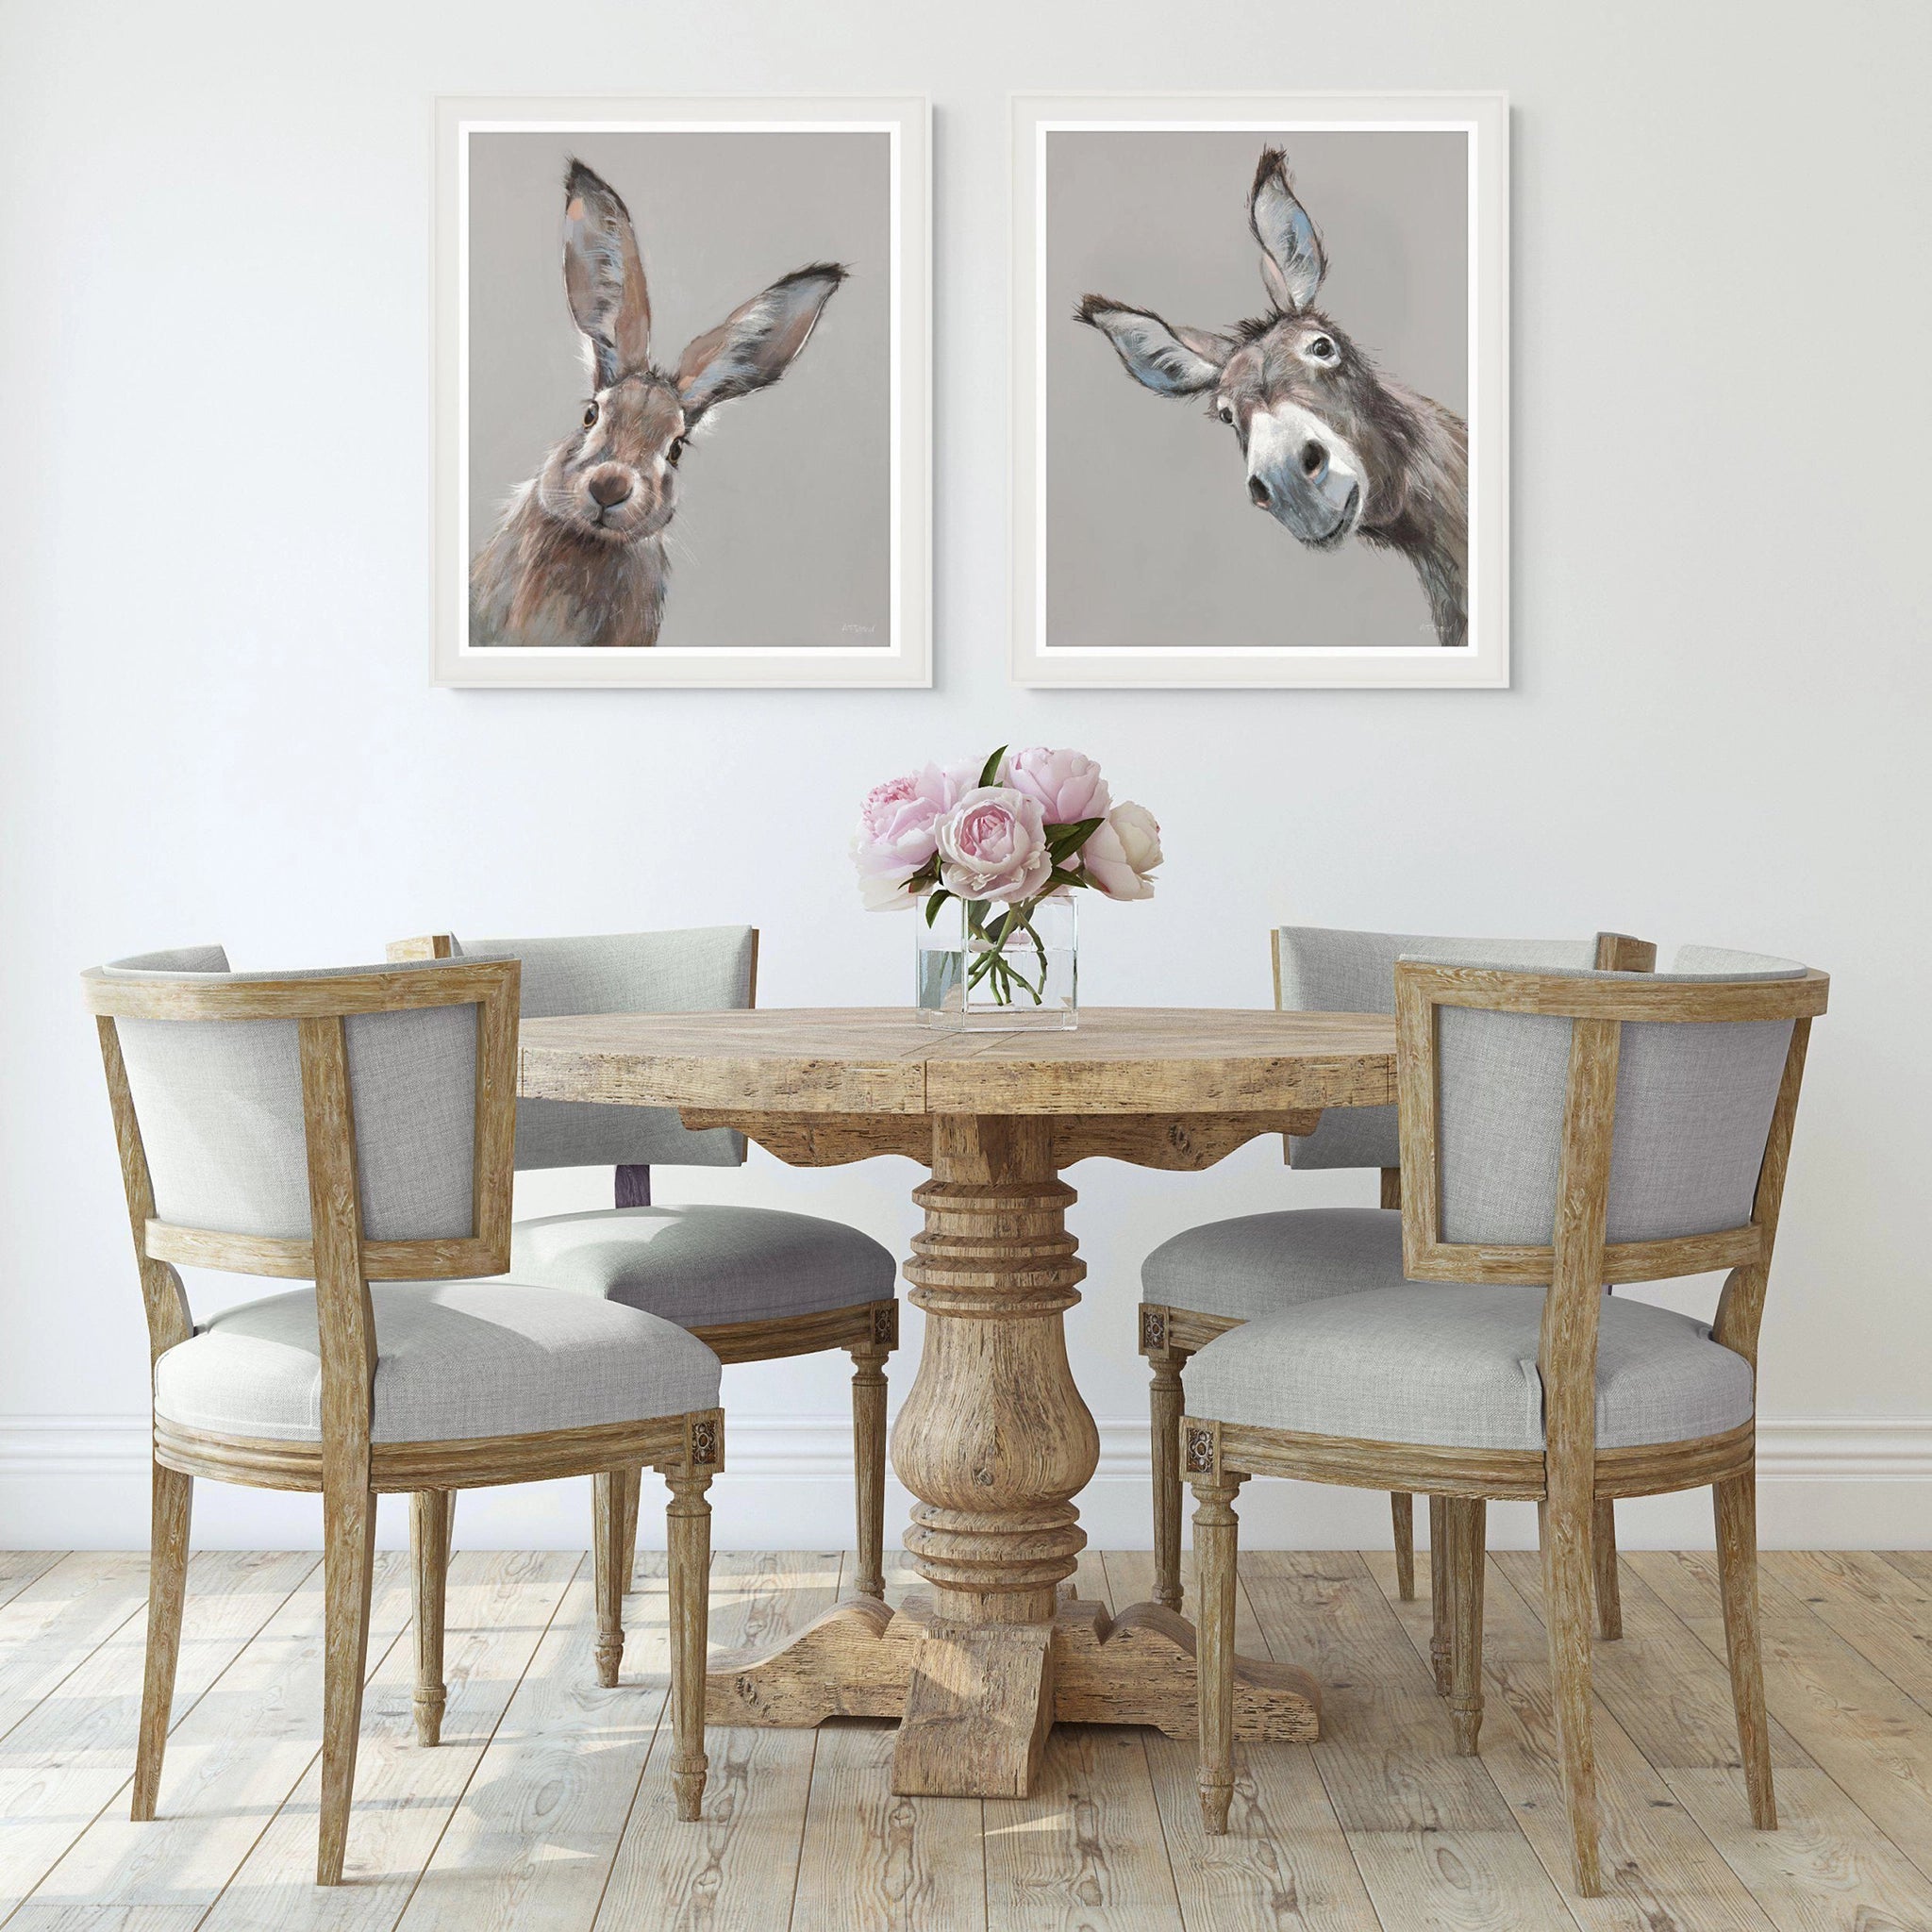 Two framed prints, one of a donkey and one of a hare, hung together on a wall